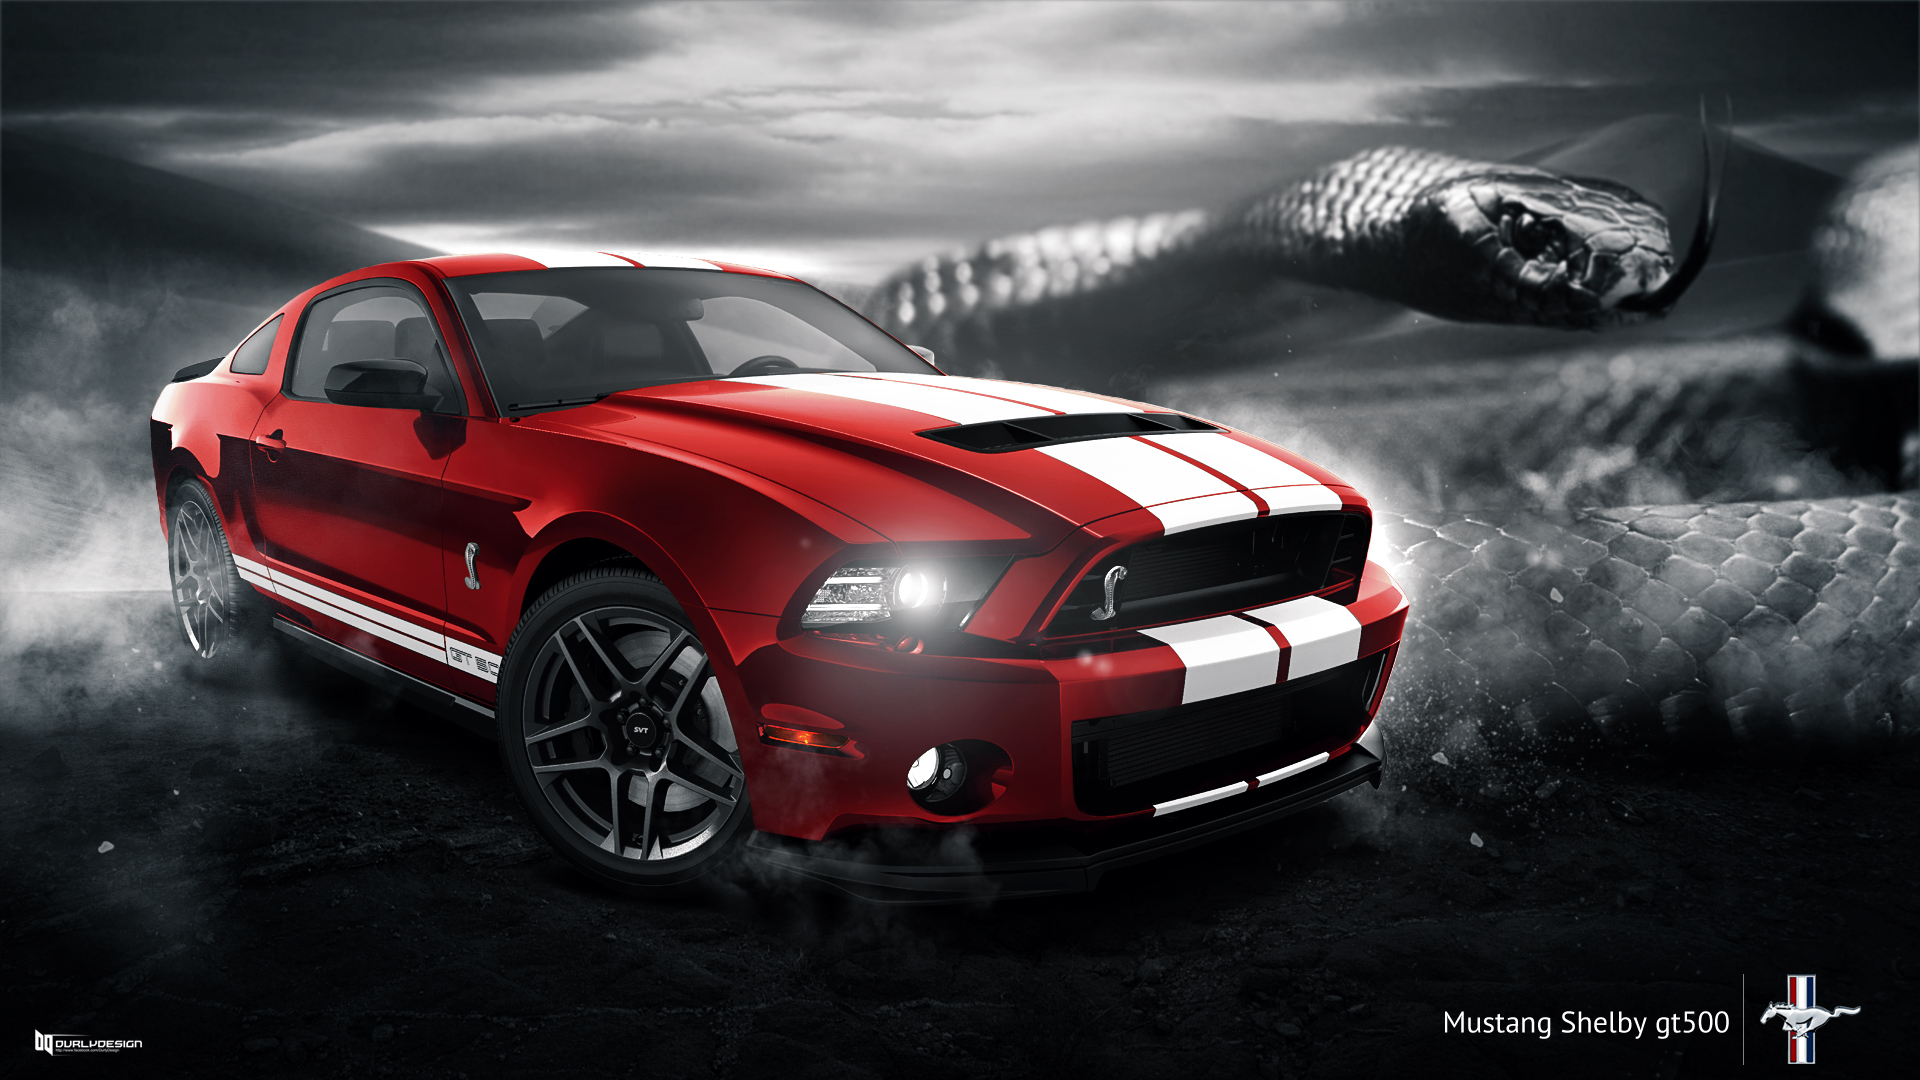 Ford Mustang Shelby gt 500 Nightmare